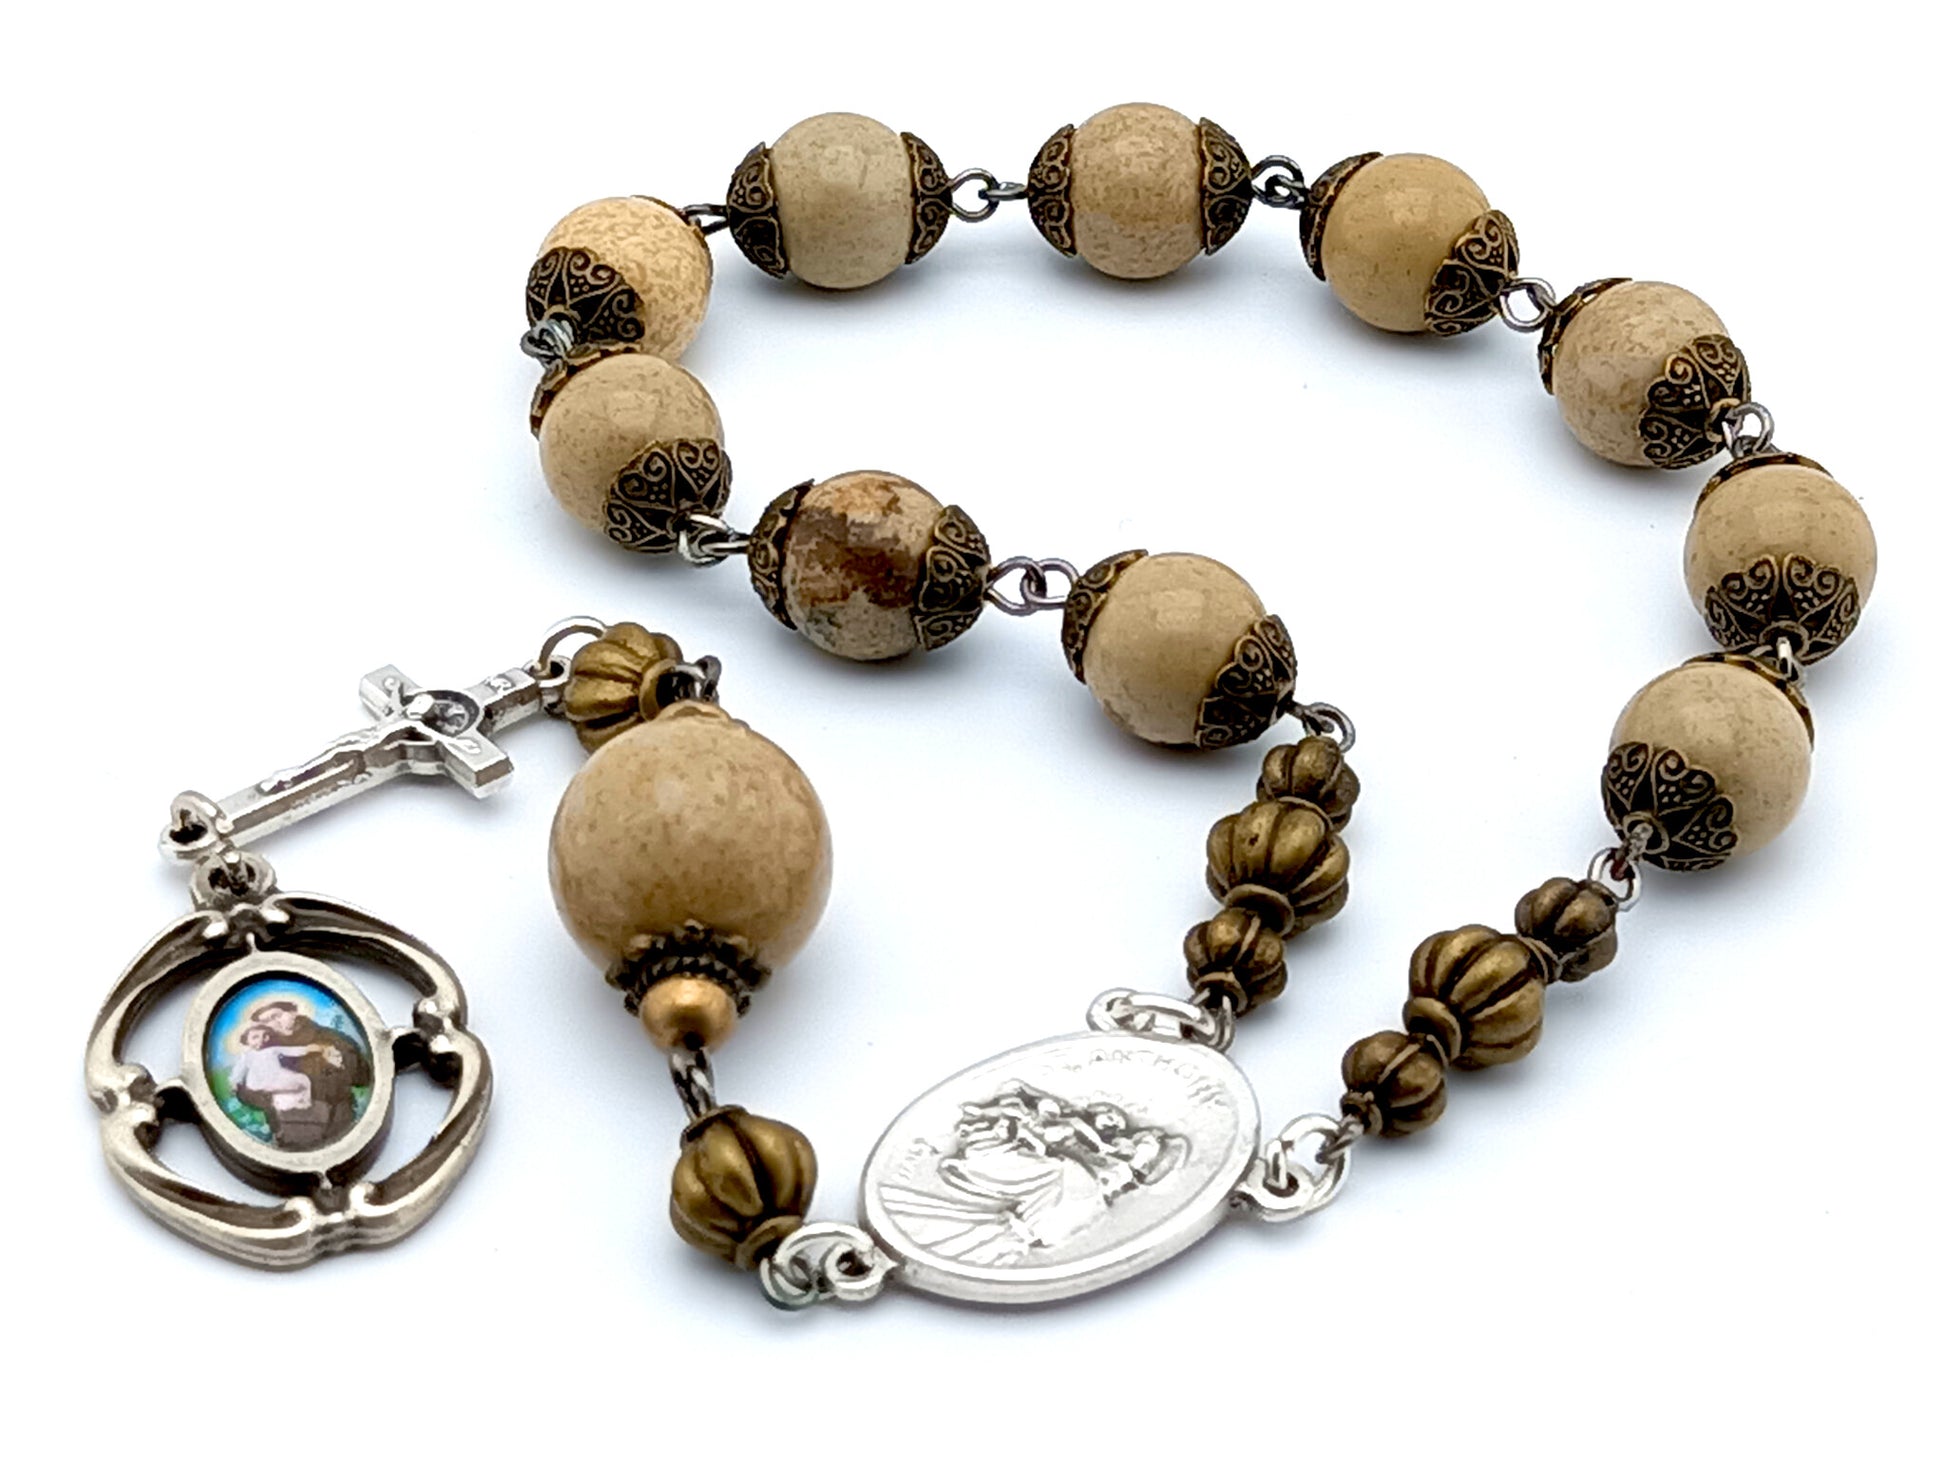 Saint Anthony unique rosary beads prayer chaplet with beige jasper gemstone beads, silver Saint Benedict crucifix and Saint Anthony relic medal.